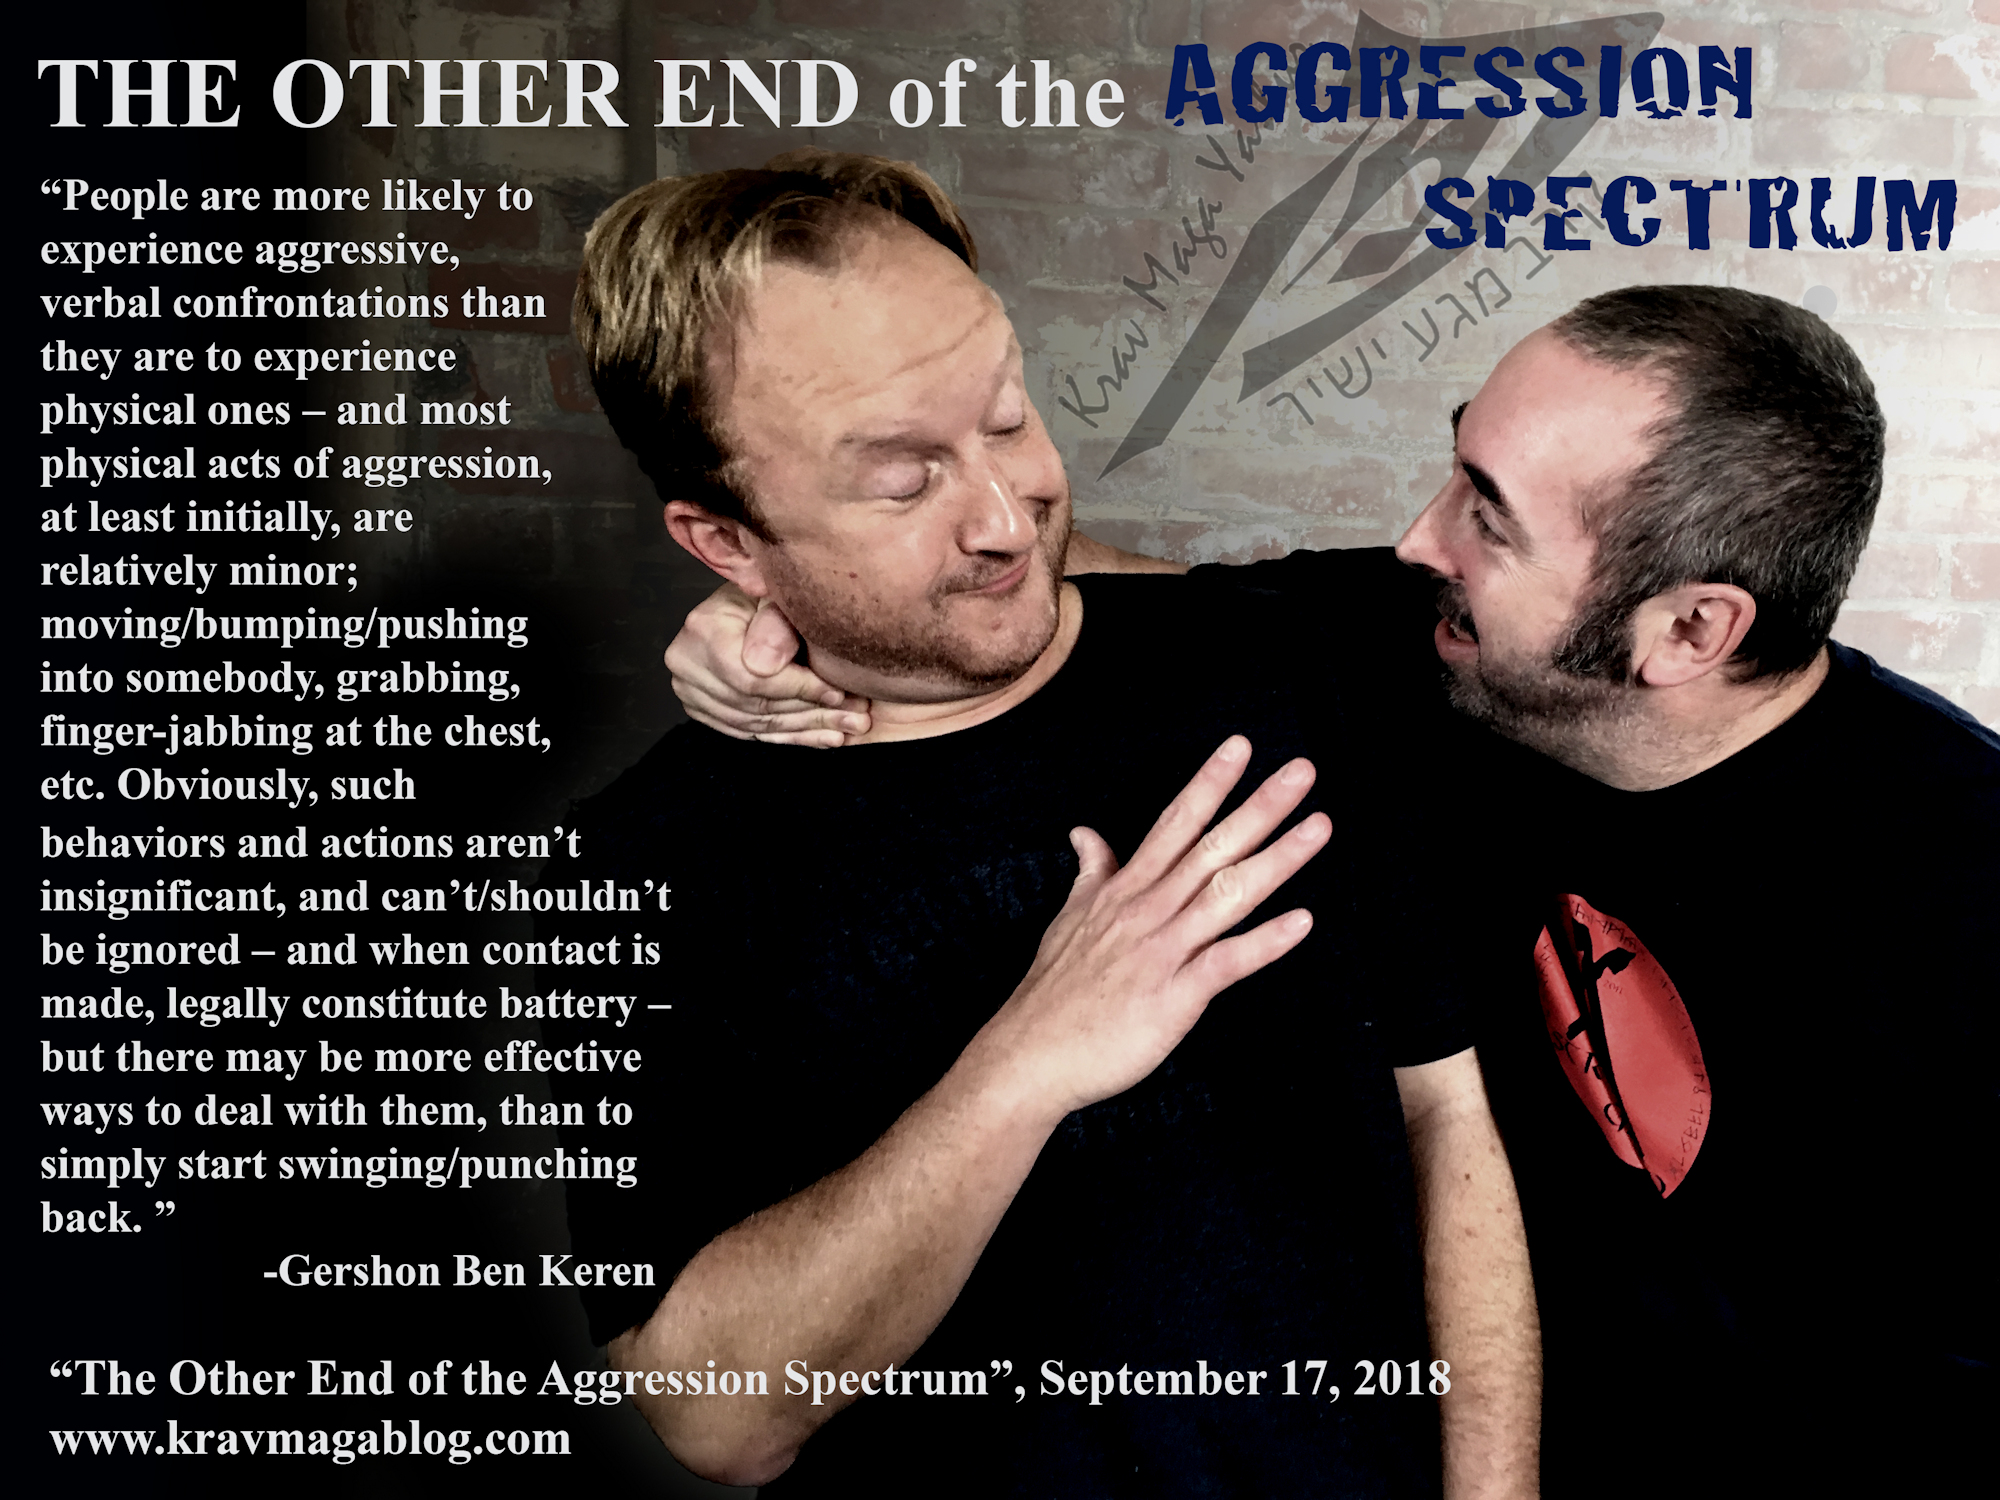 Blog About The Other End Of The Aggression Spectrum